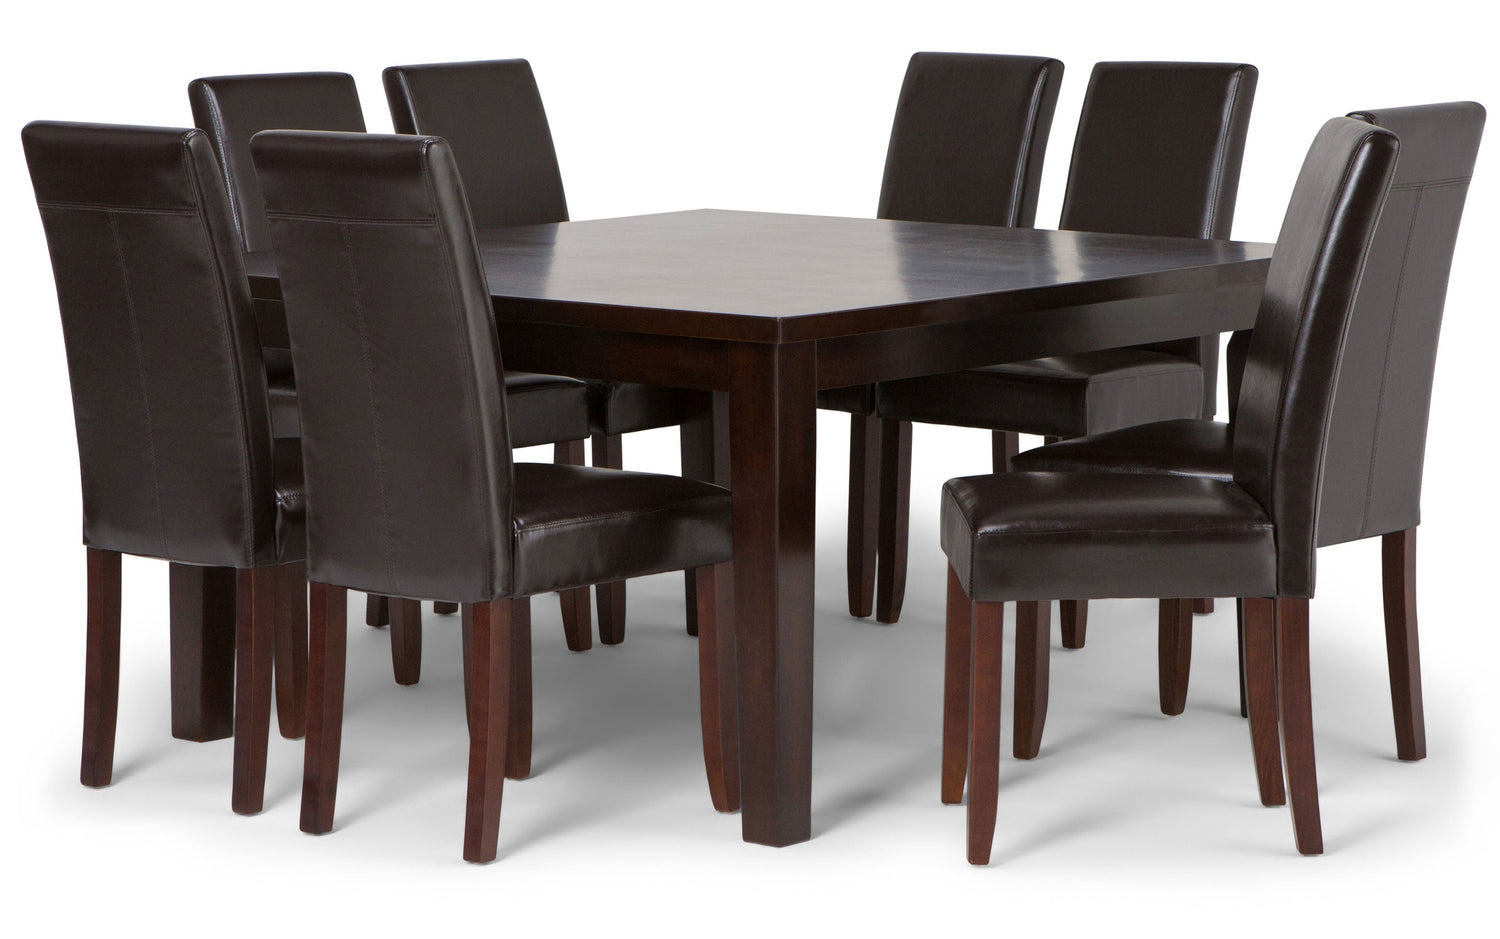 Tanners Brown Vegan Leather | Acadian 9 Piece Dining Set